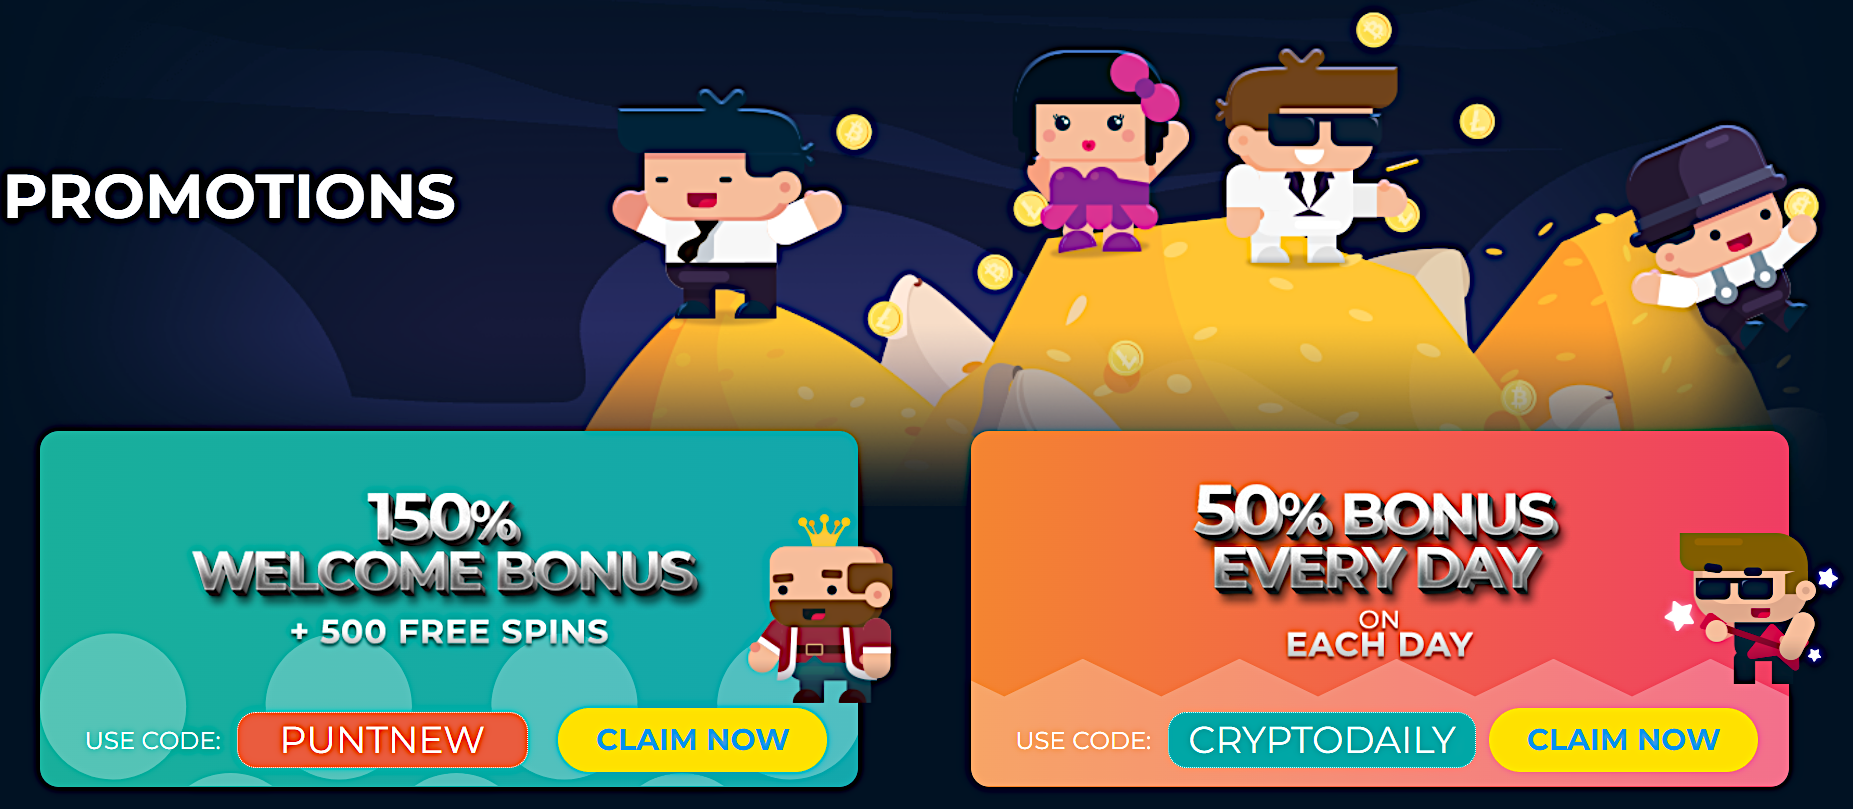 Visit the Punt Casino Promotions page to find Punt Casino promo codes for big bonuses and daily offers.